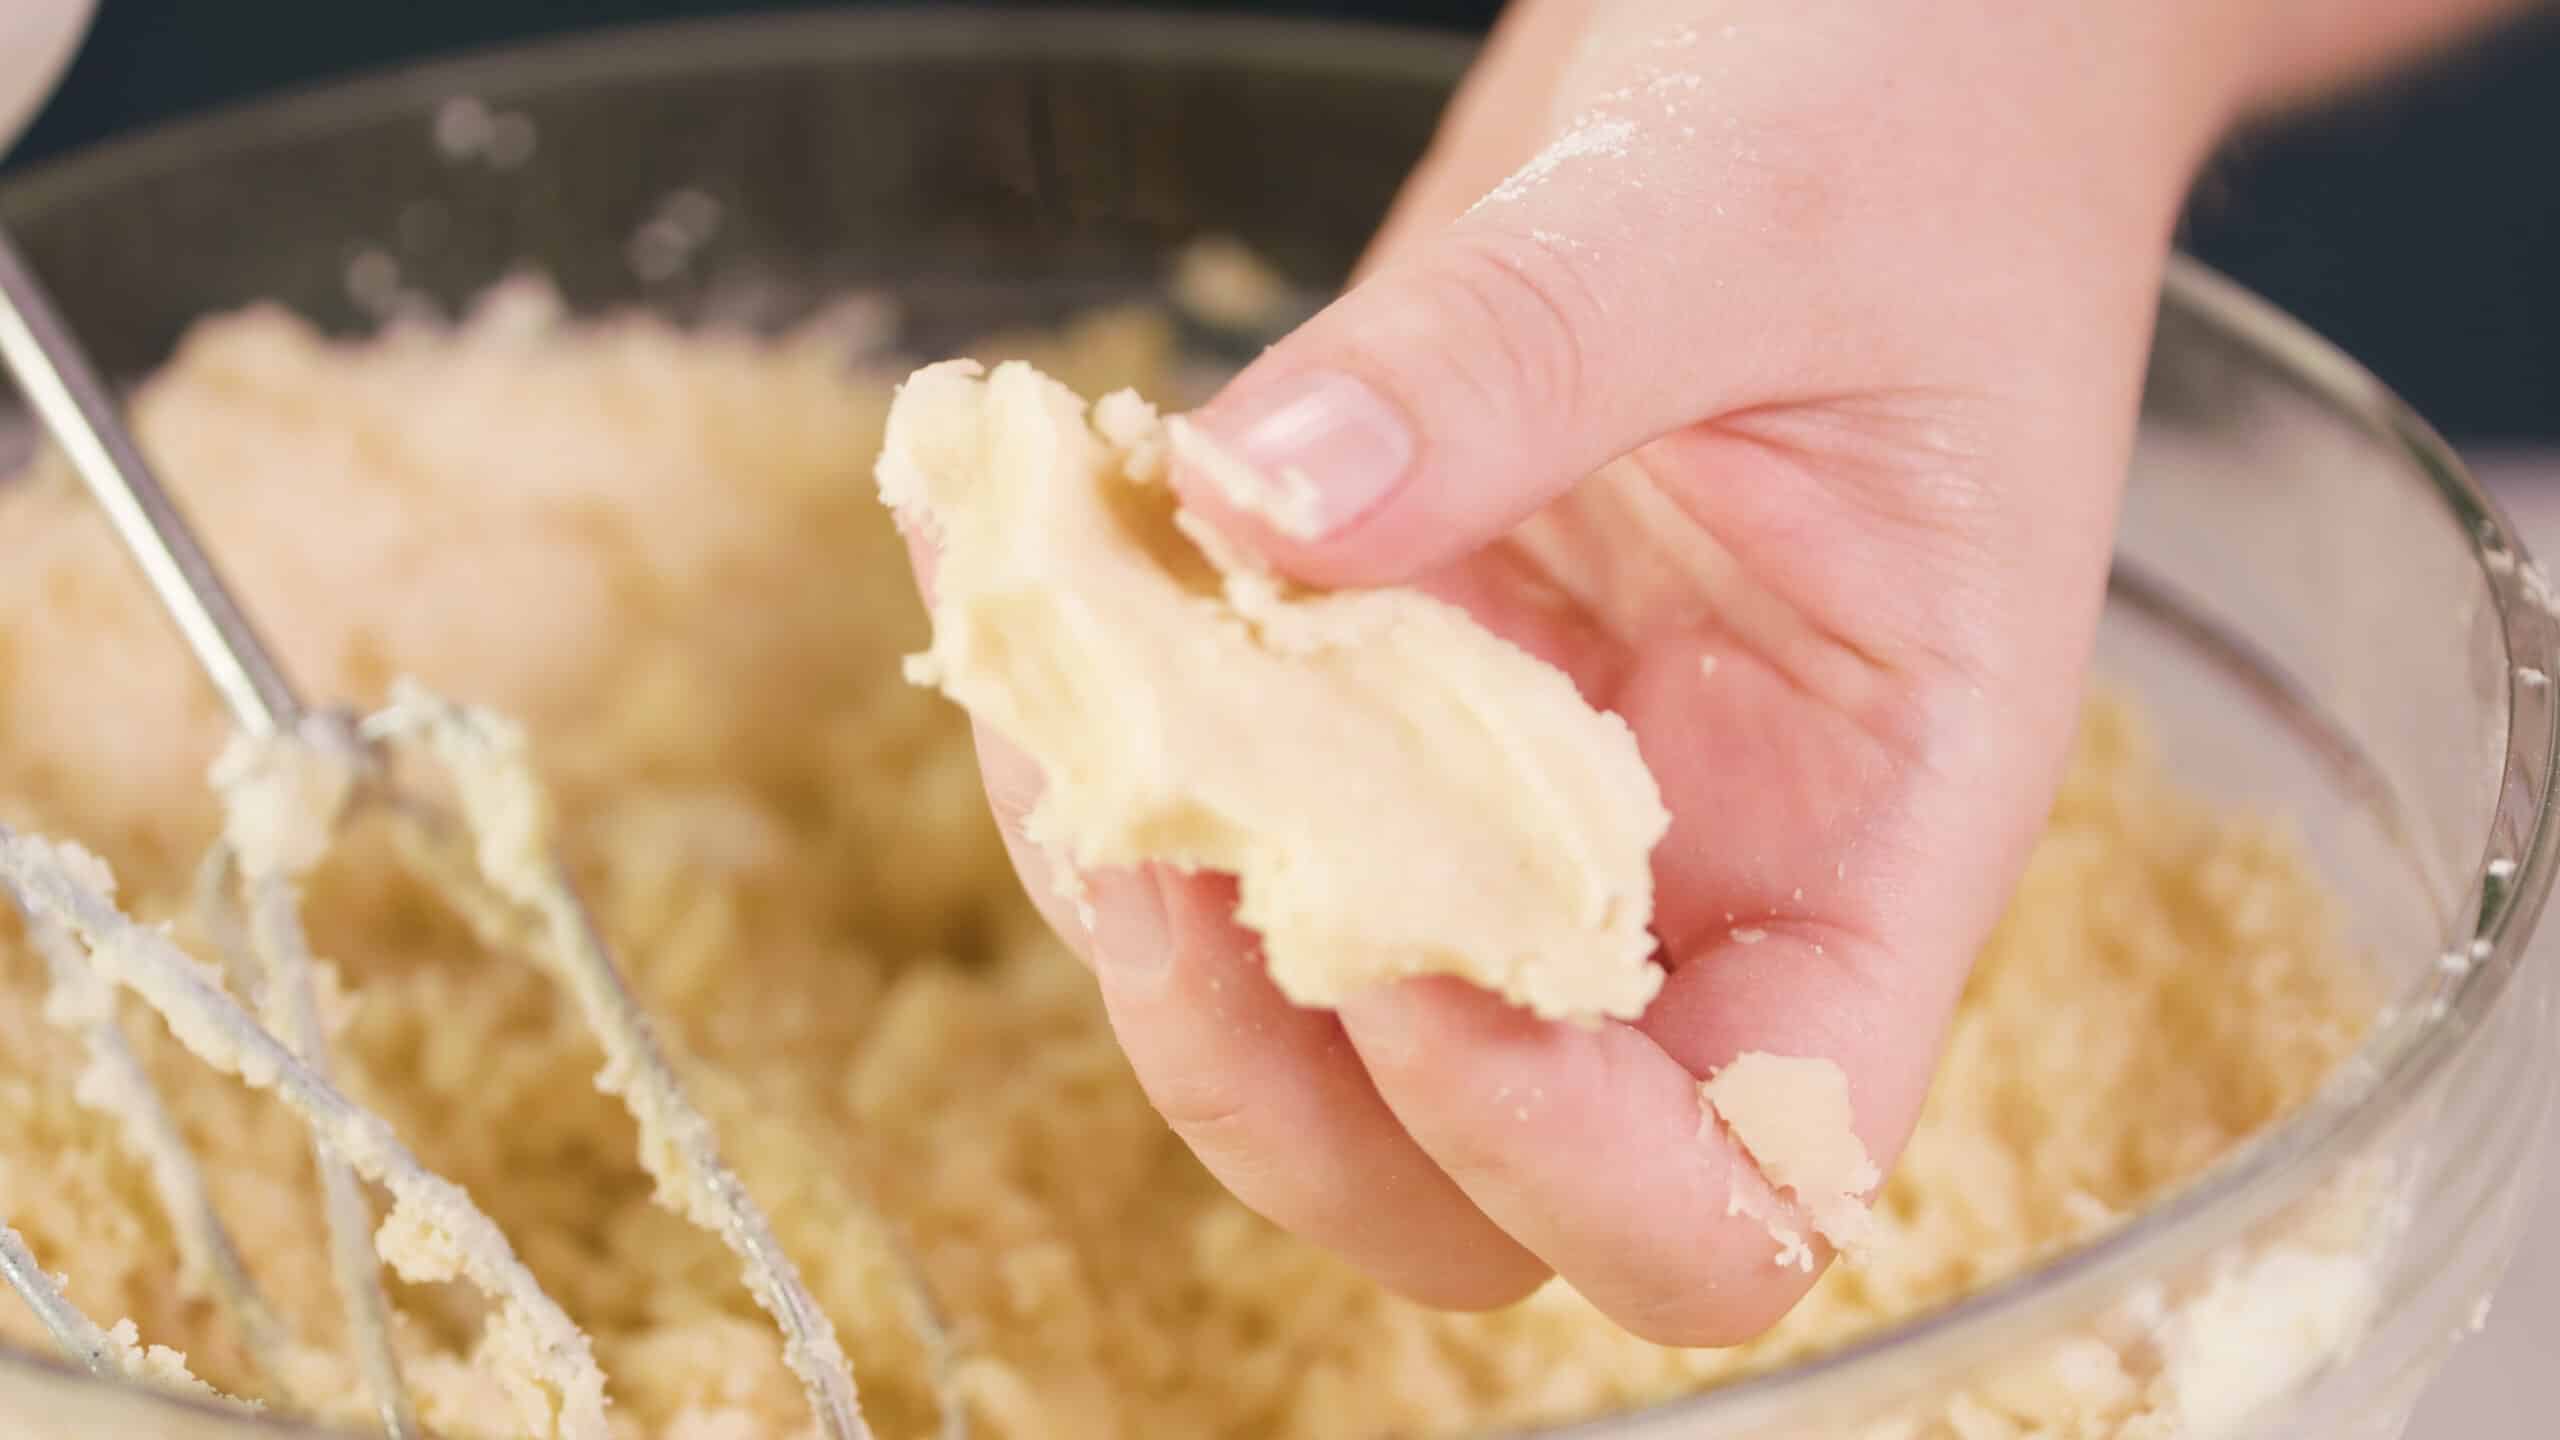 Close up view of a hand holding squeezed cookie batter to show the desired texture when the batter is pressed with a large clear glass mixing bowl filled with cookie batter in the background with metal beaters leaning into the bowl from a hand mixer.